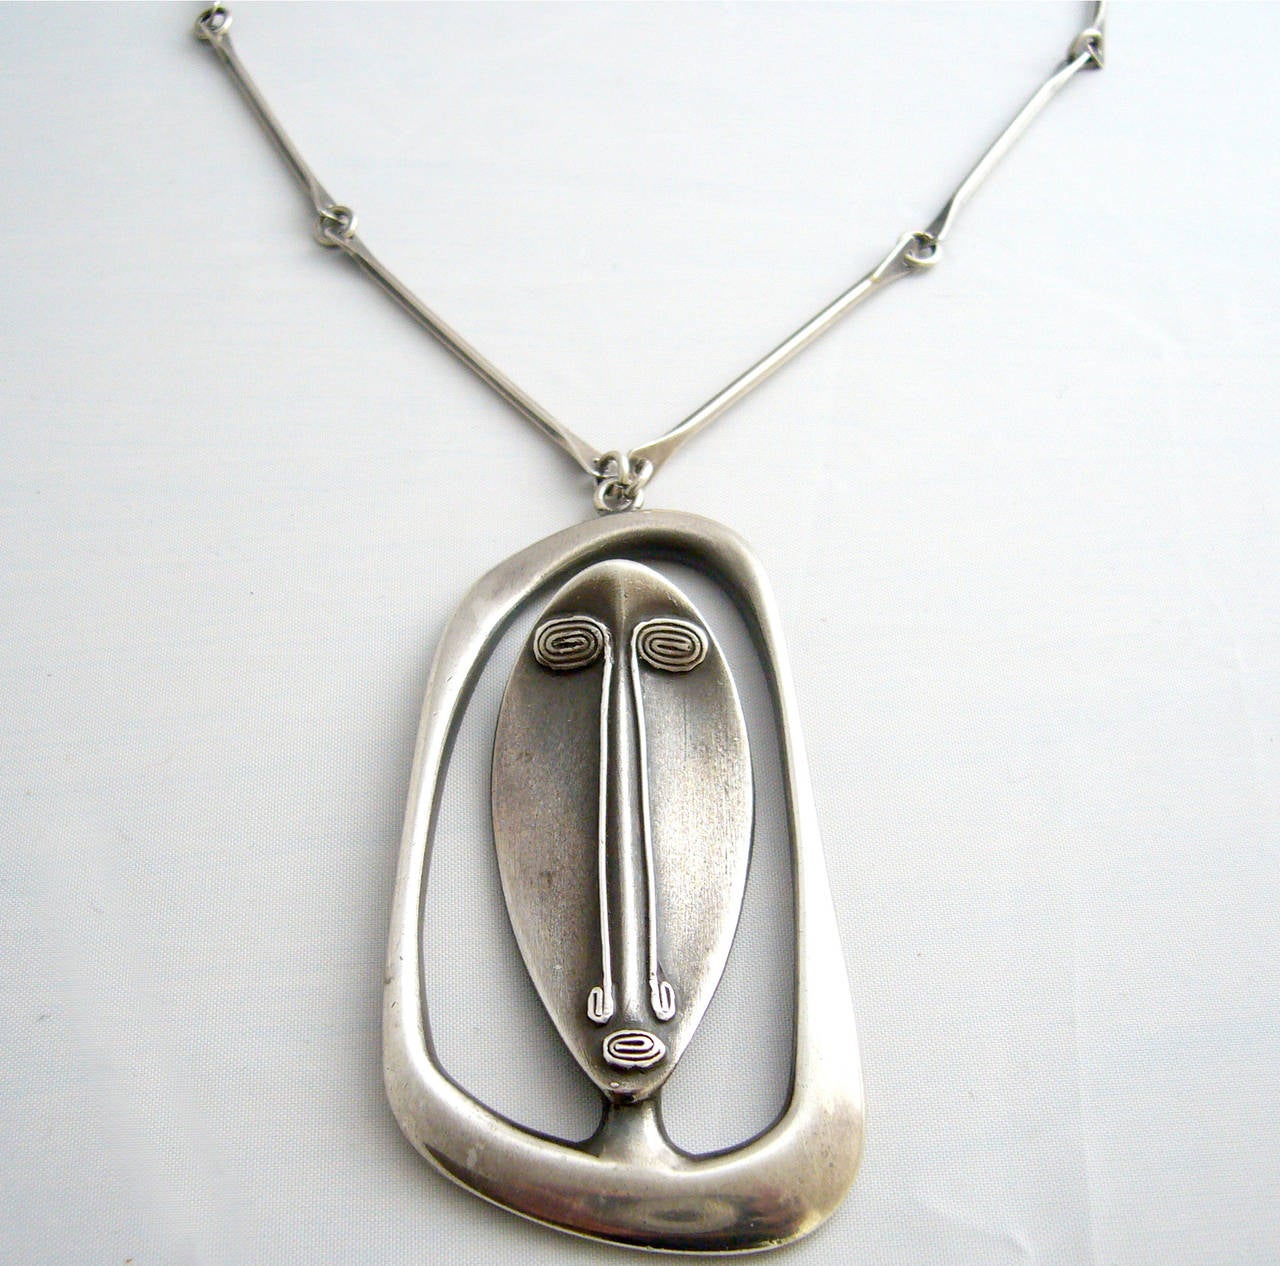 A 1950s sterling silver mask necklace created by Irvin and Bonnie Burkee of of Arizona. Necklace is comprised of a large modernist mask pendant measuring 3.25